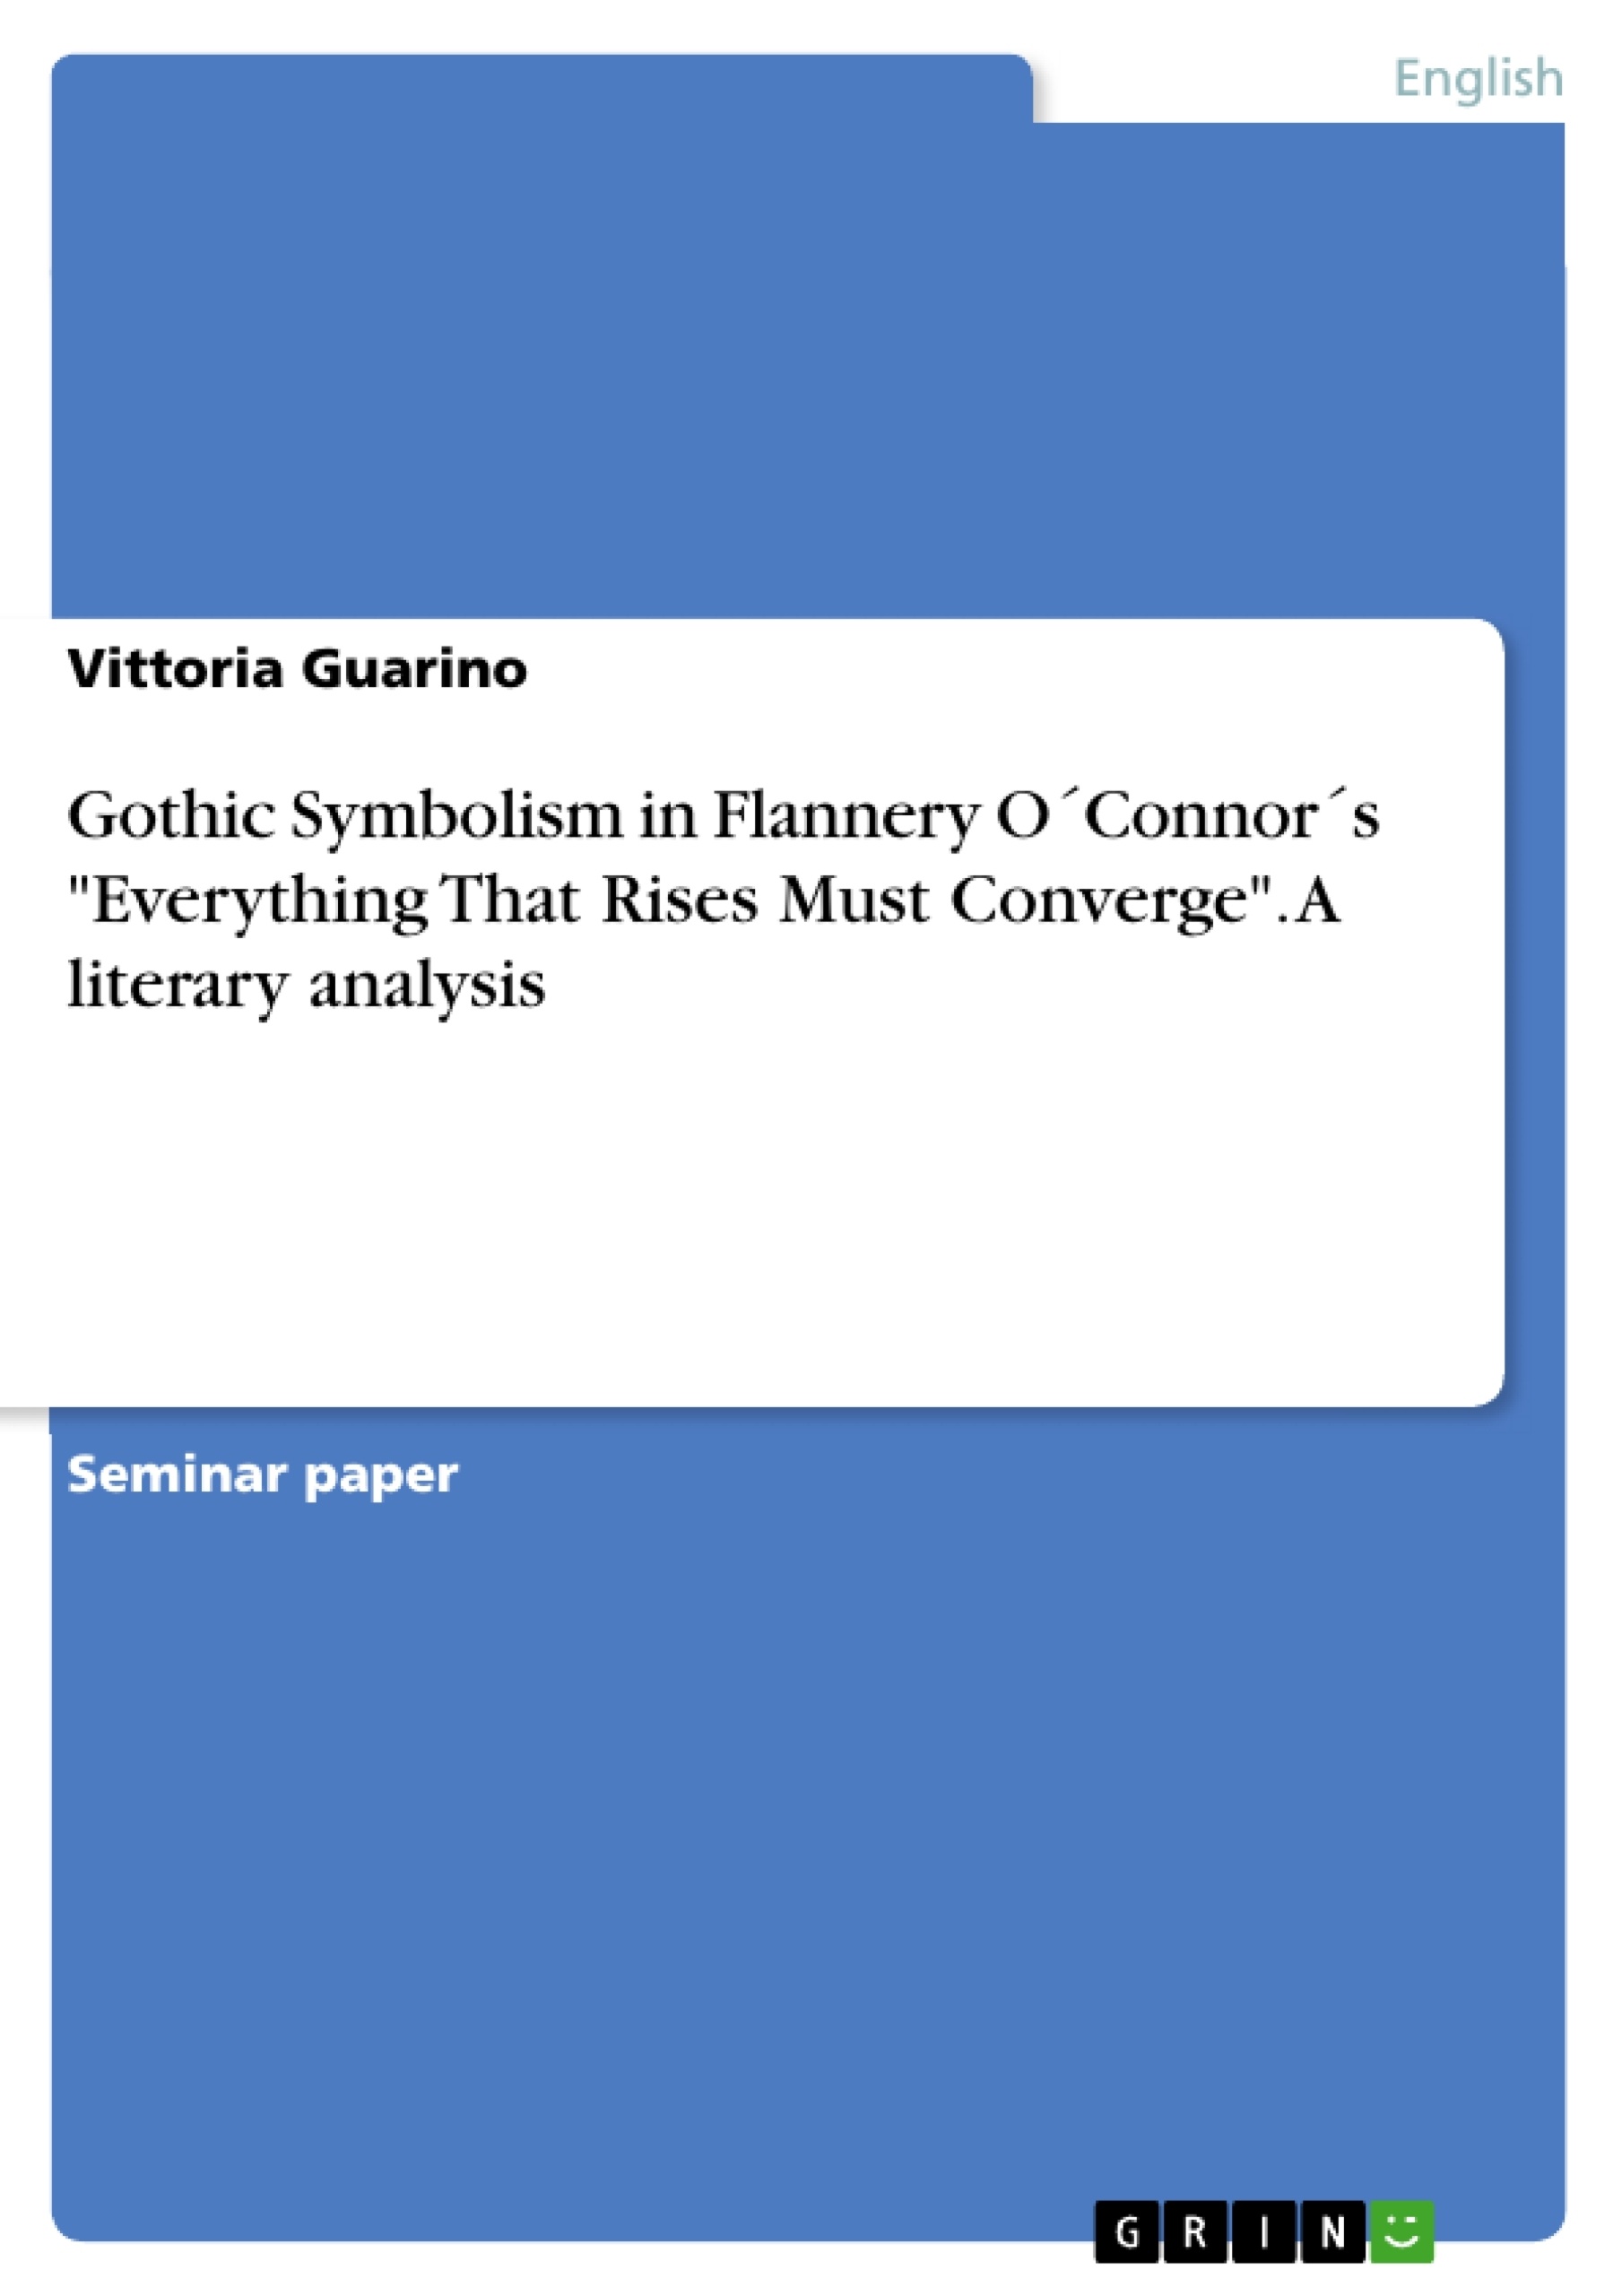 everything that rises must converge summary